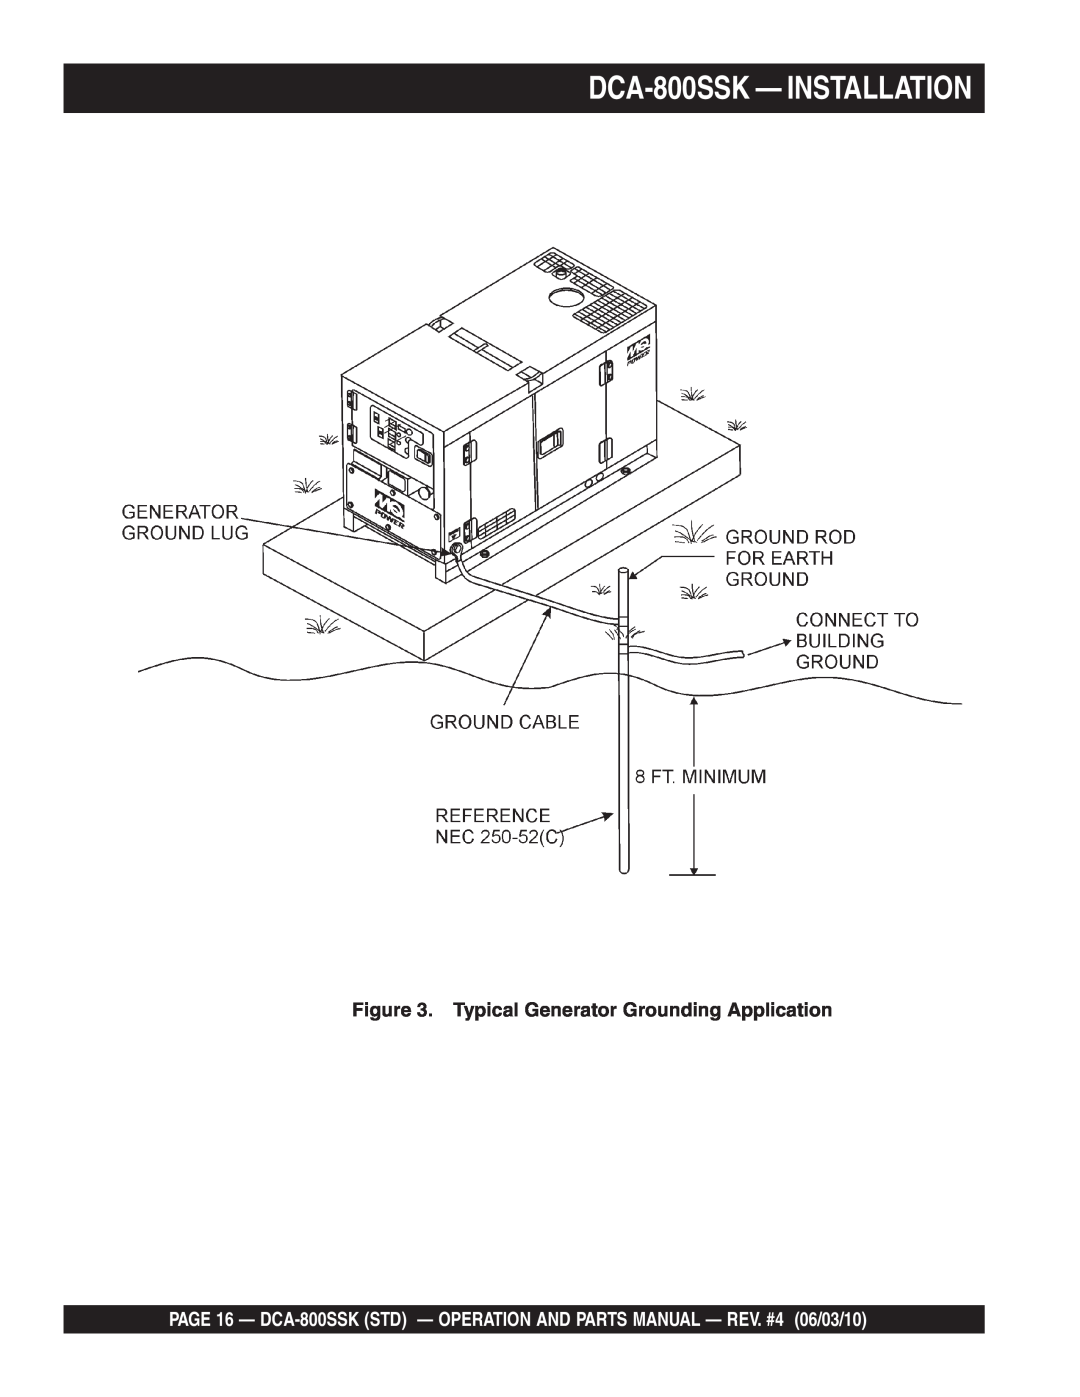 Multiquip operation manual DCA-800SSK - INSTALLATION, Typical Generator Grounding Application 